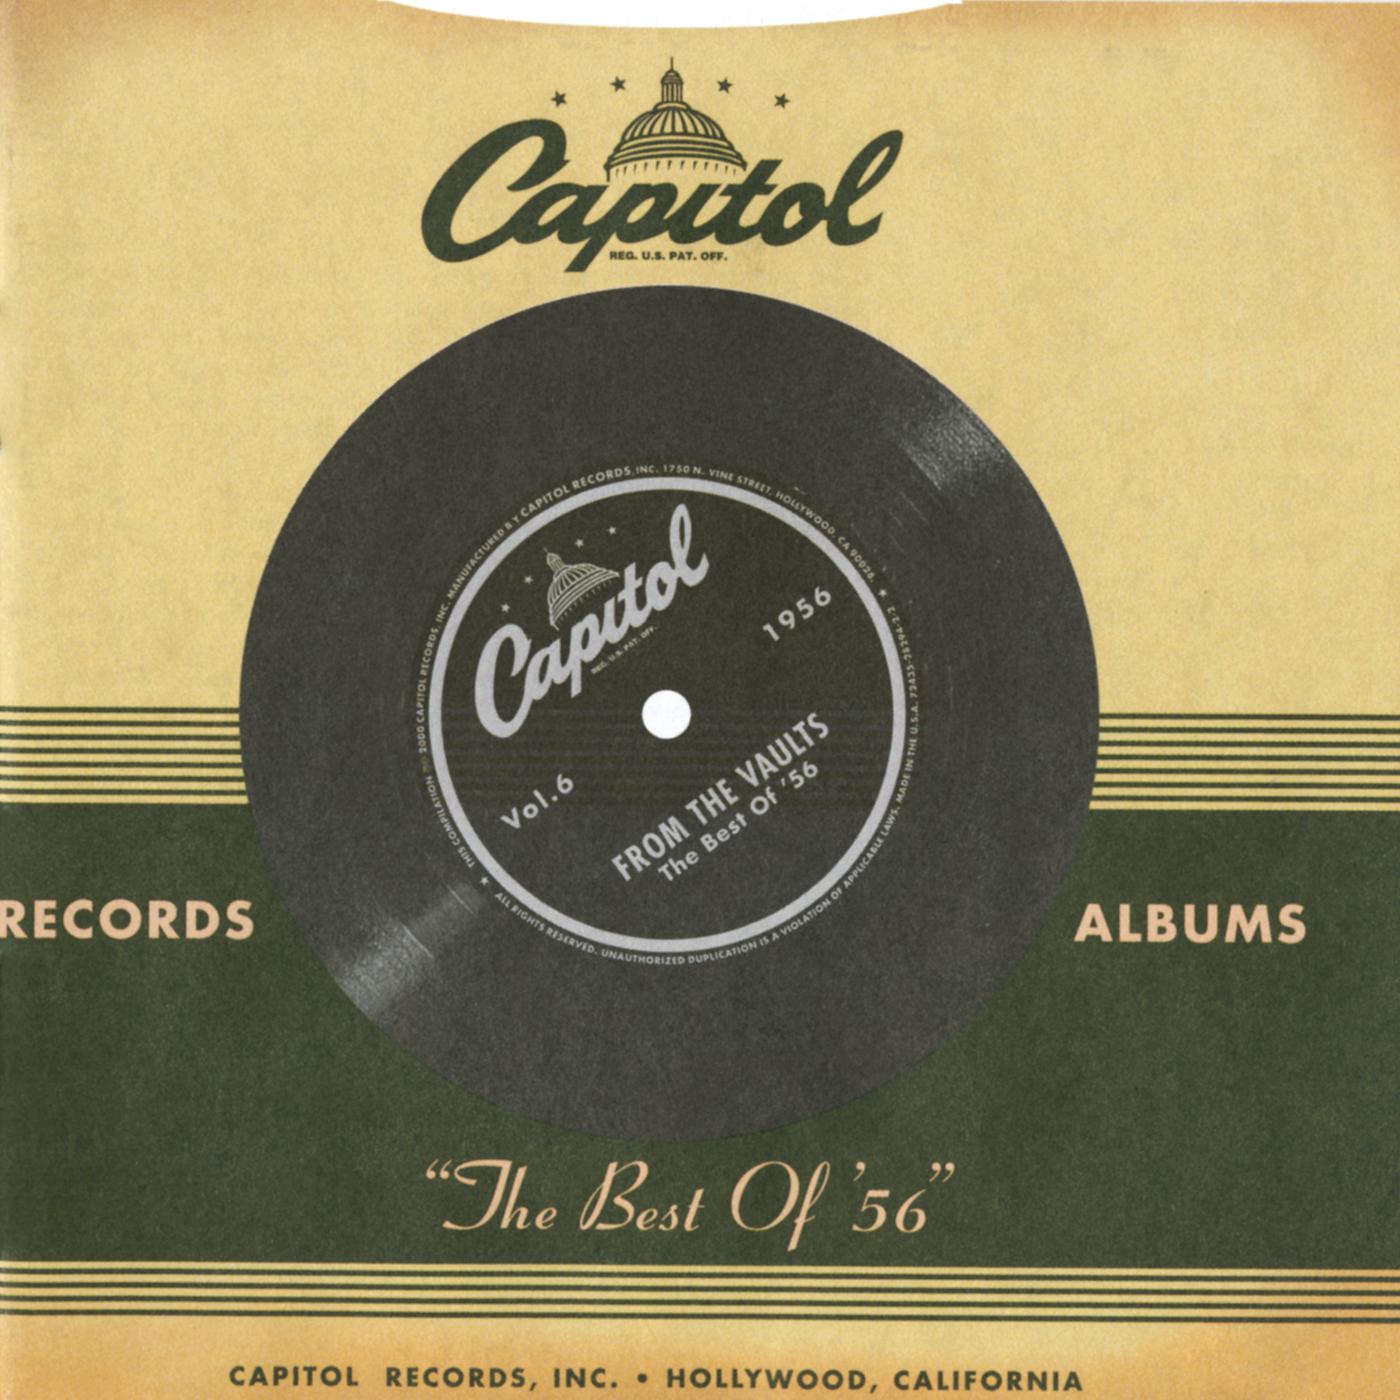 Постер альбома Capitol Records From The Vaults: "The Best Of '56"